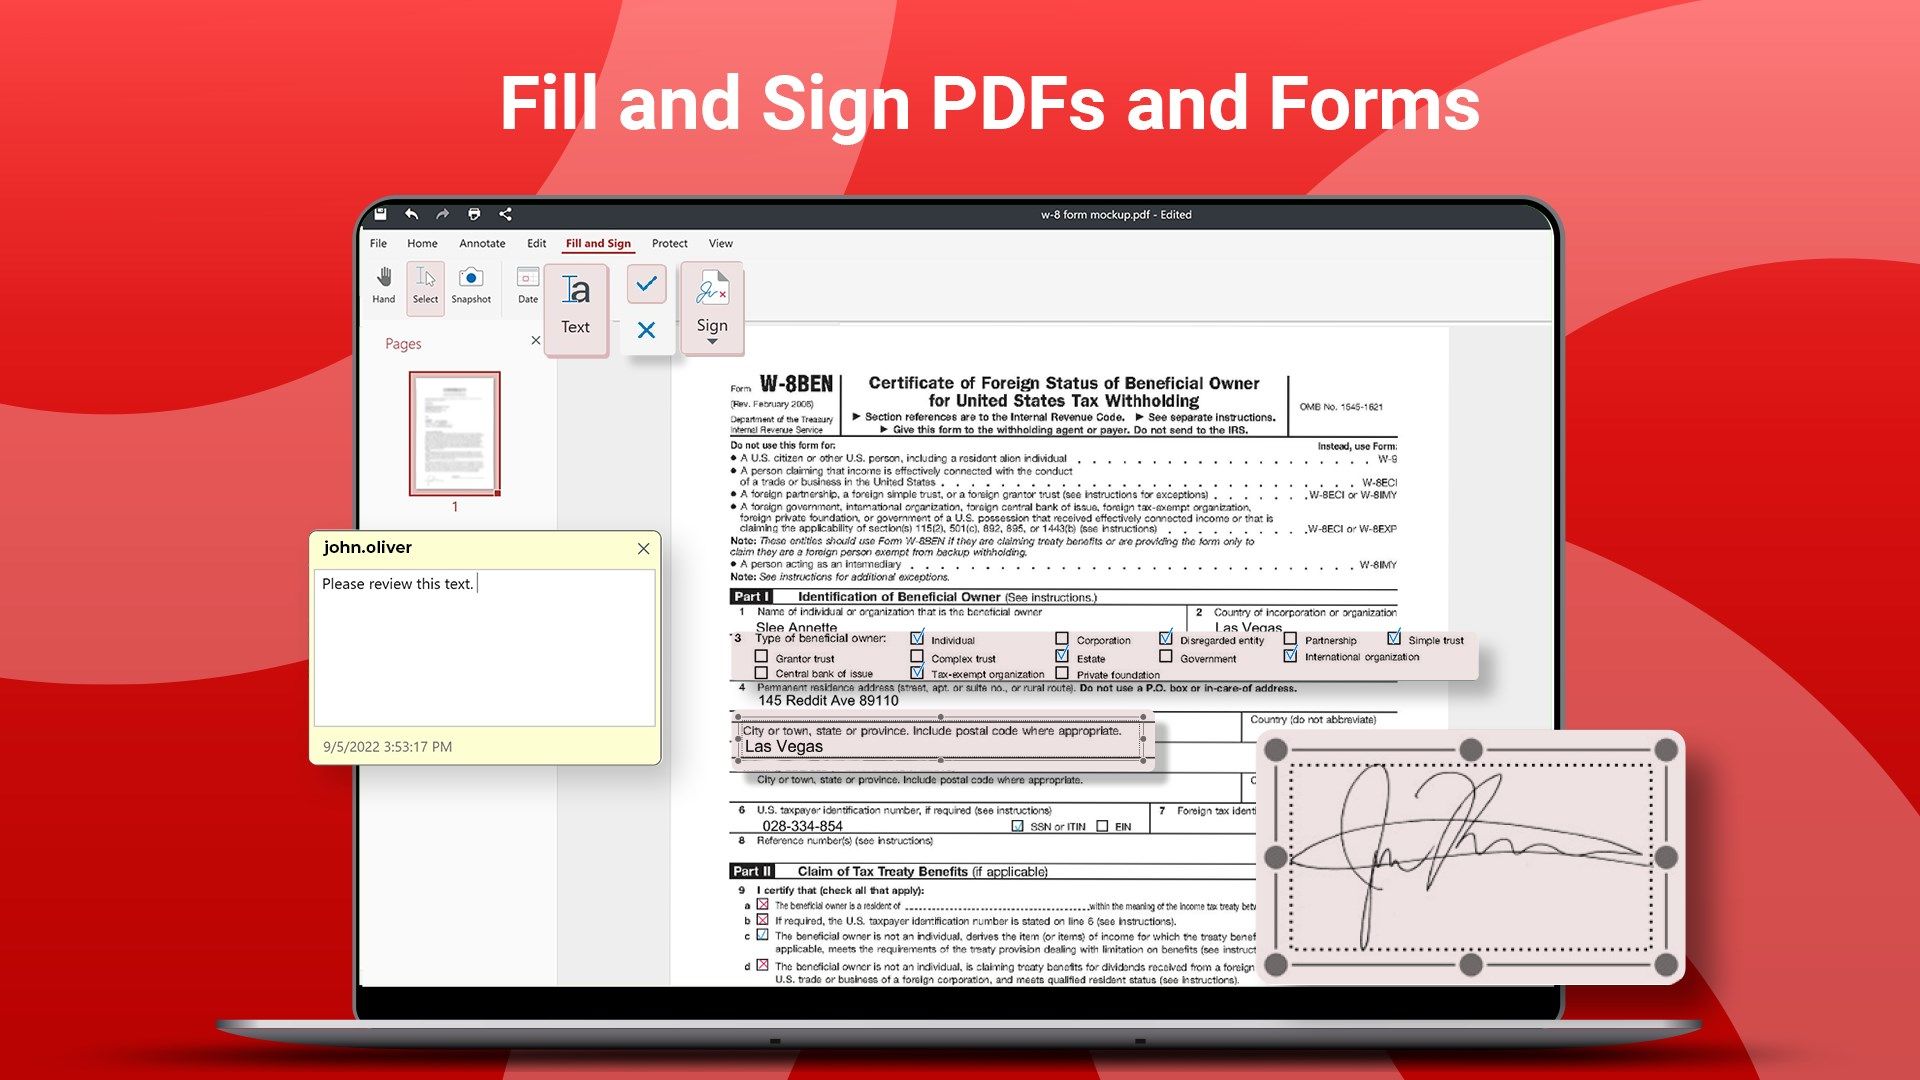 Fill & sign forms, invoices, contracts, and other vital PDFs digitally to
cut down on paper use. Signatures. Fillable Forms. Stamps. Cut the paper out of your work.